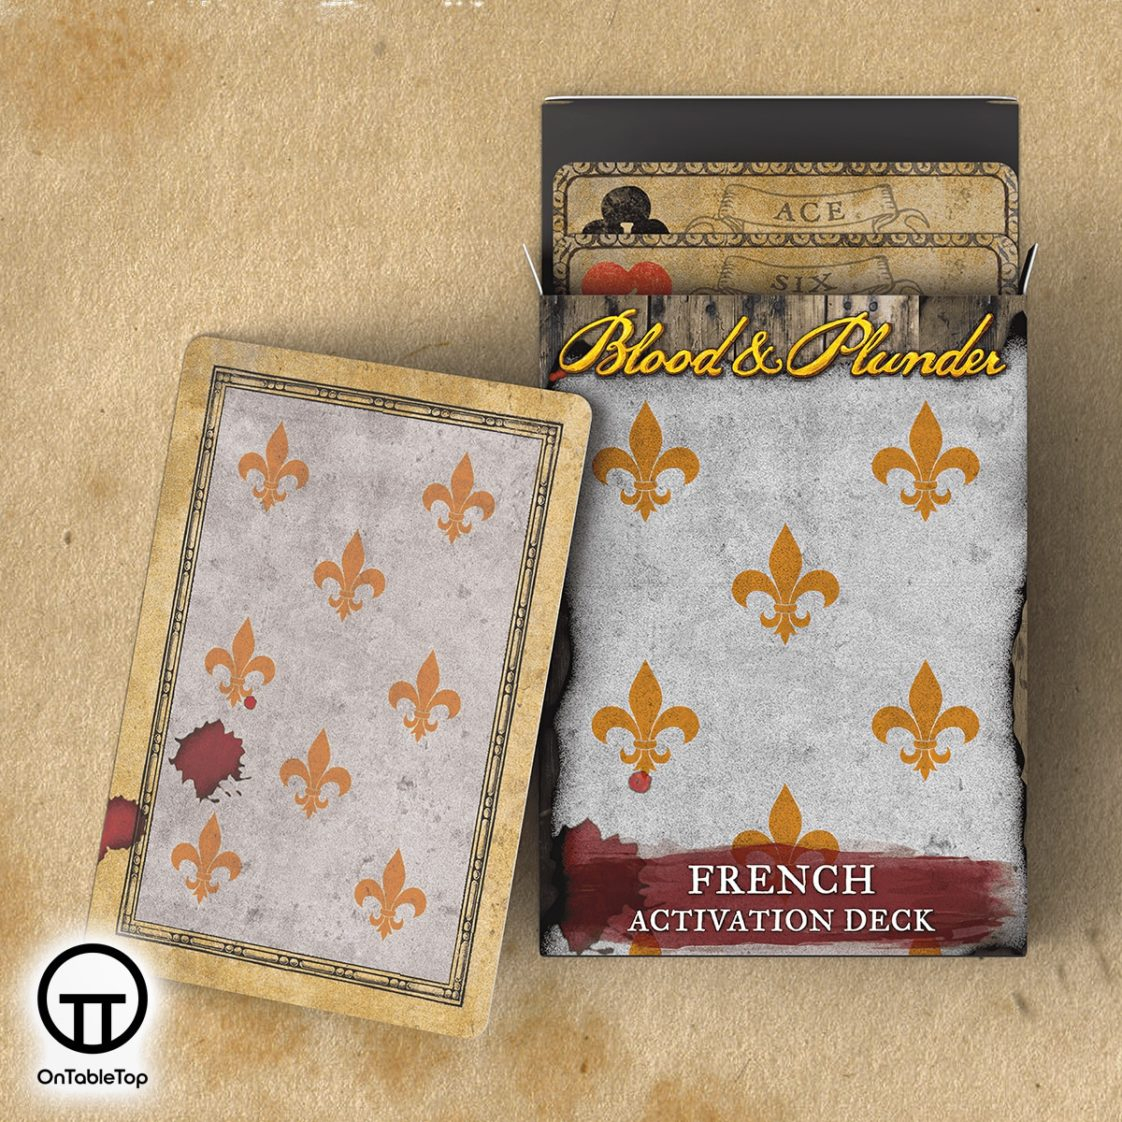 French Action Deck FGD0003 Blood & Plunder 